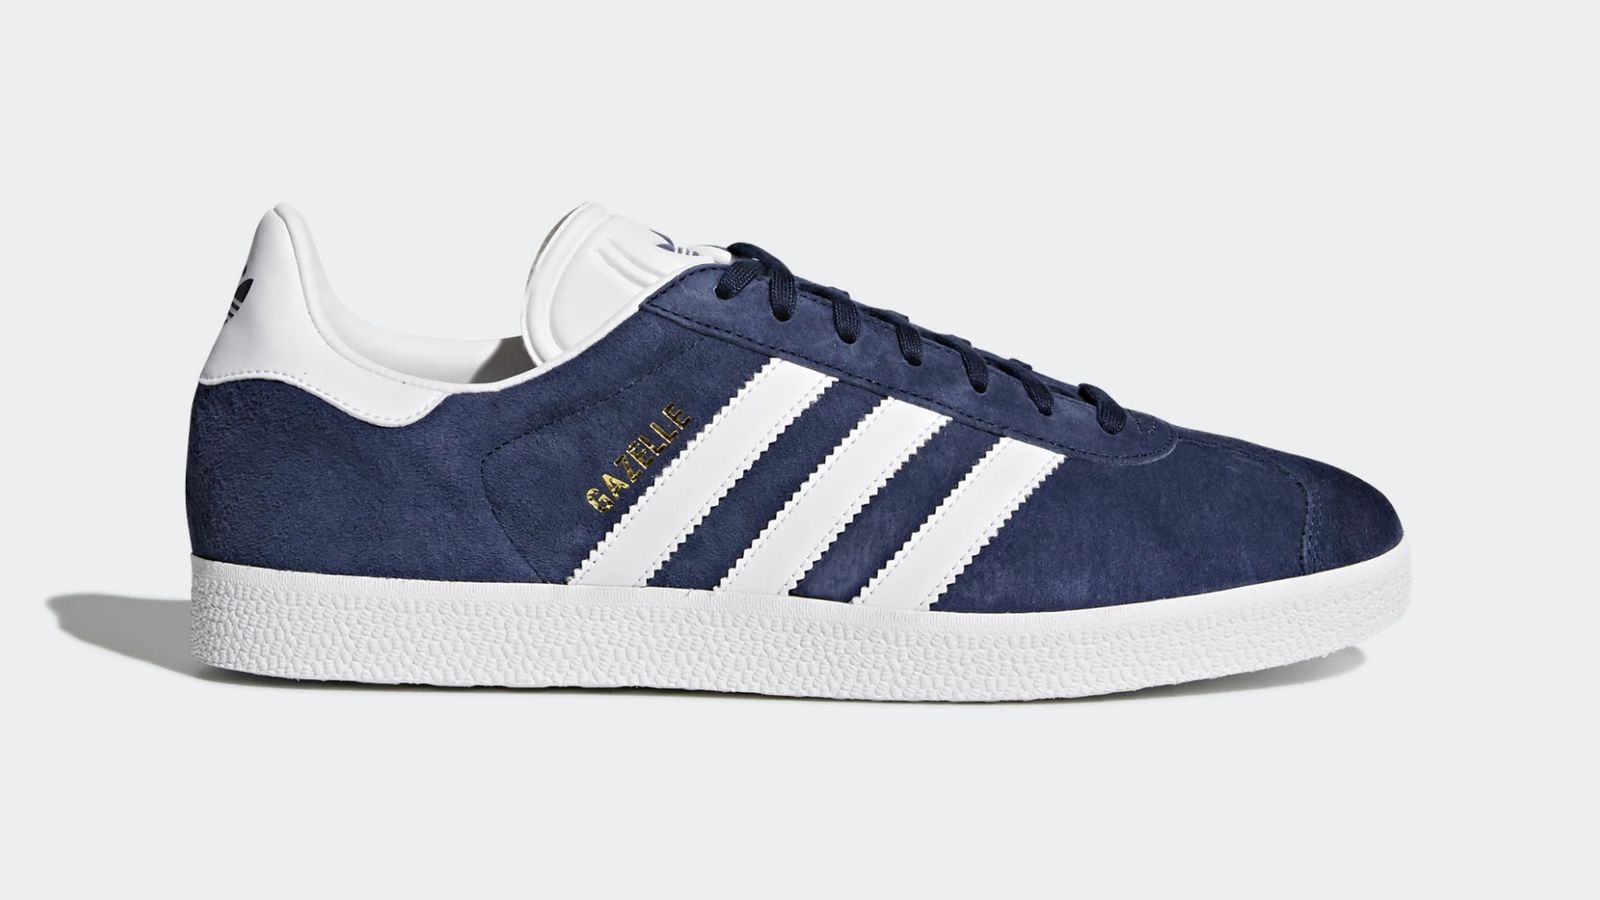 adidas Gazelle product image of a blue suede adidas low-top feature white side stripes and midsole.